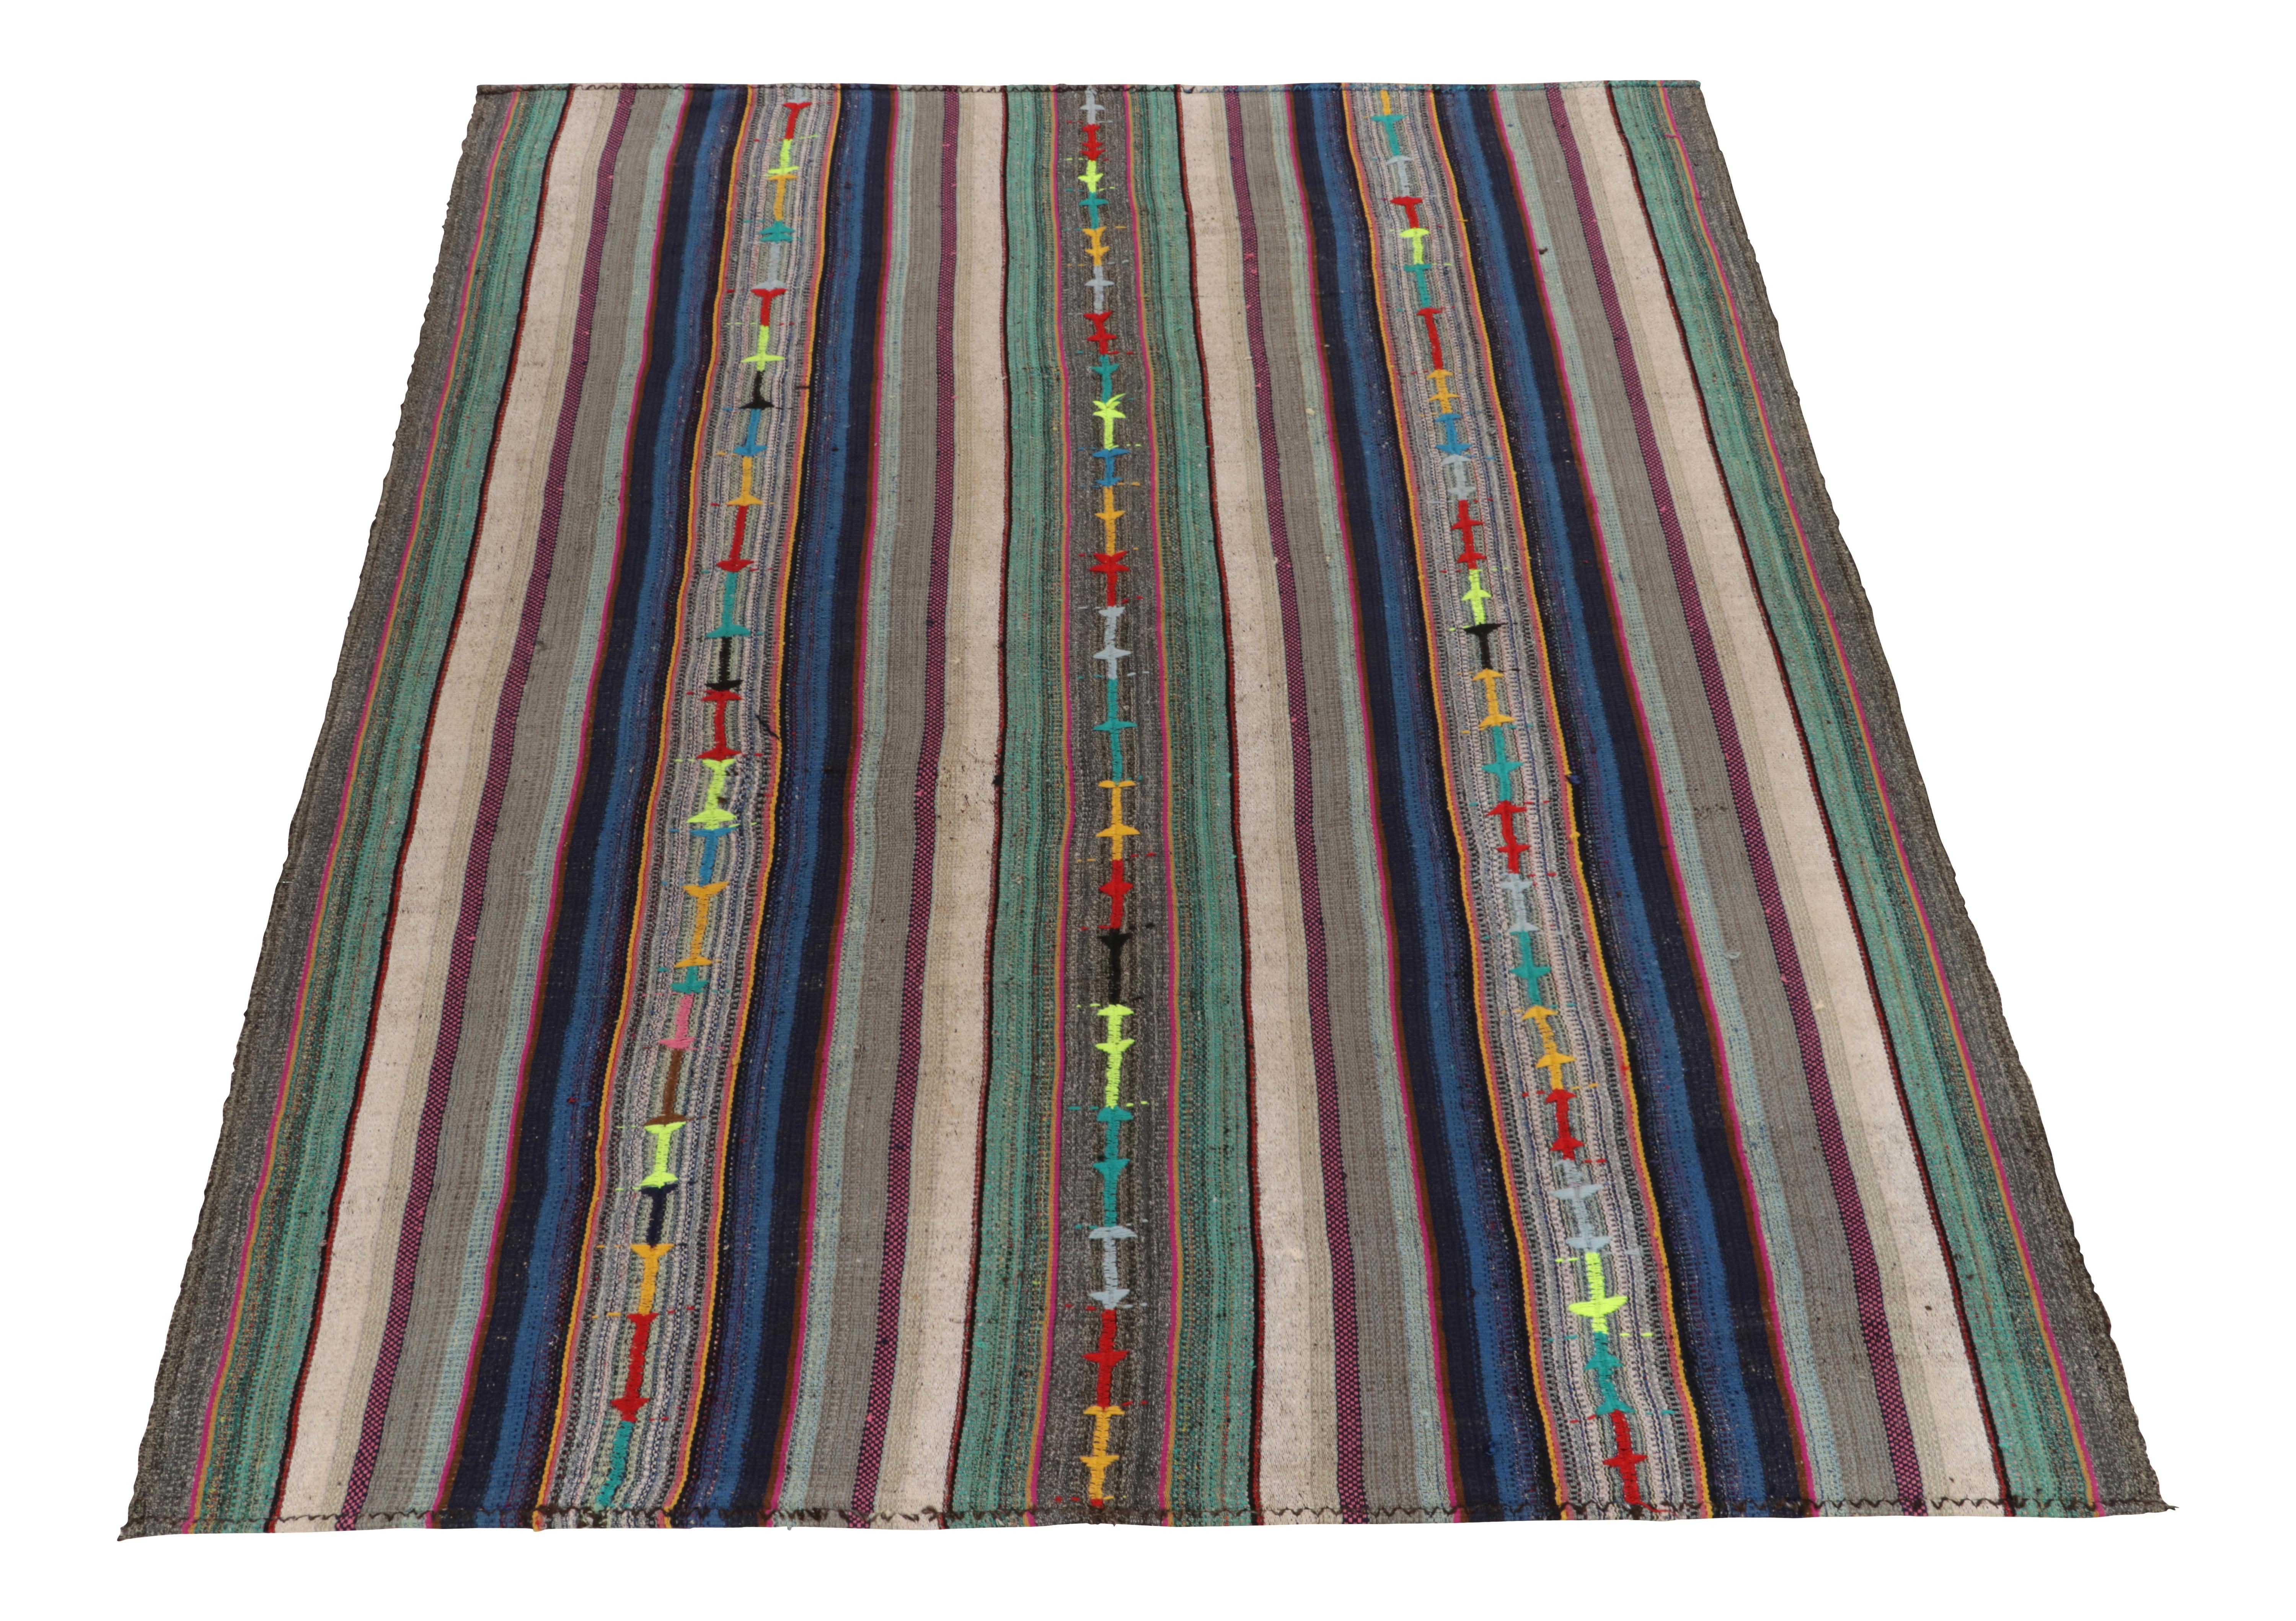 Originating from Turkey circa 1950-1960, a rare type of mid-century chaput kilim rug entering our classic flat weave curations. Characterized by fine detailing with the colors within the polychromatic stripes, the light & refreshing piece welcomes a